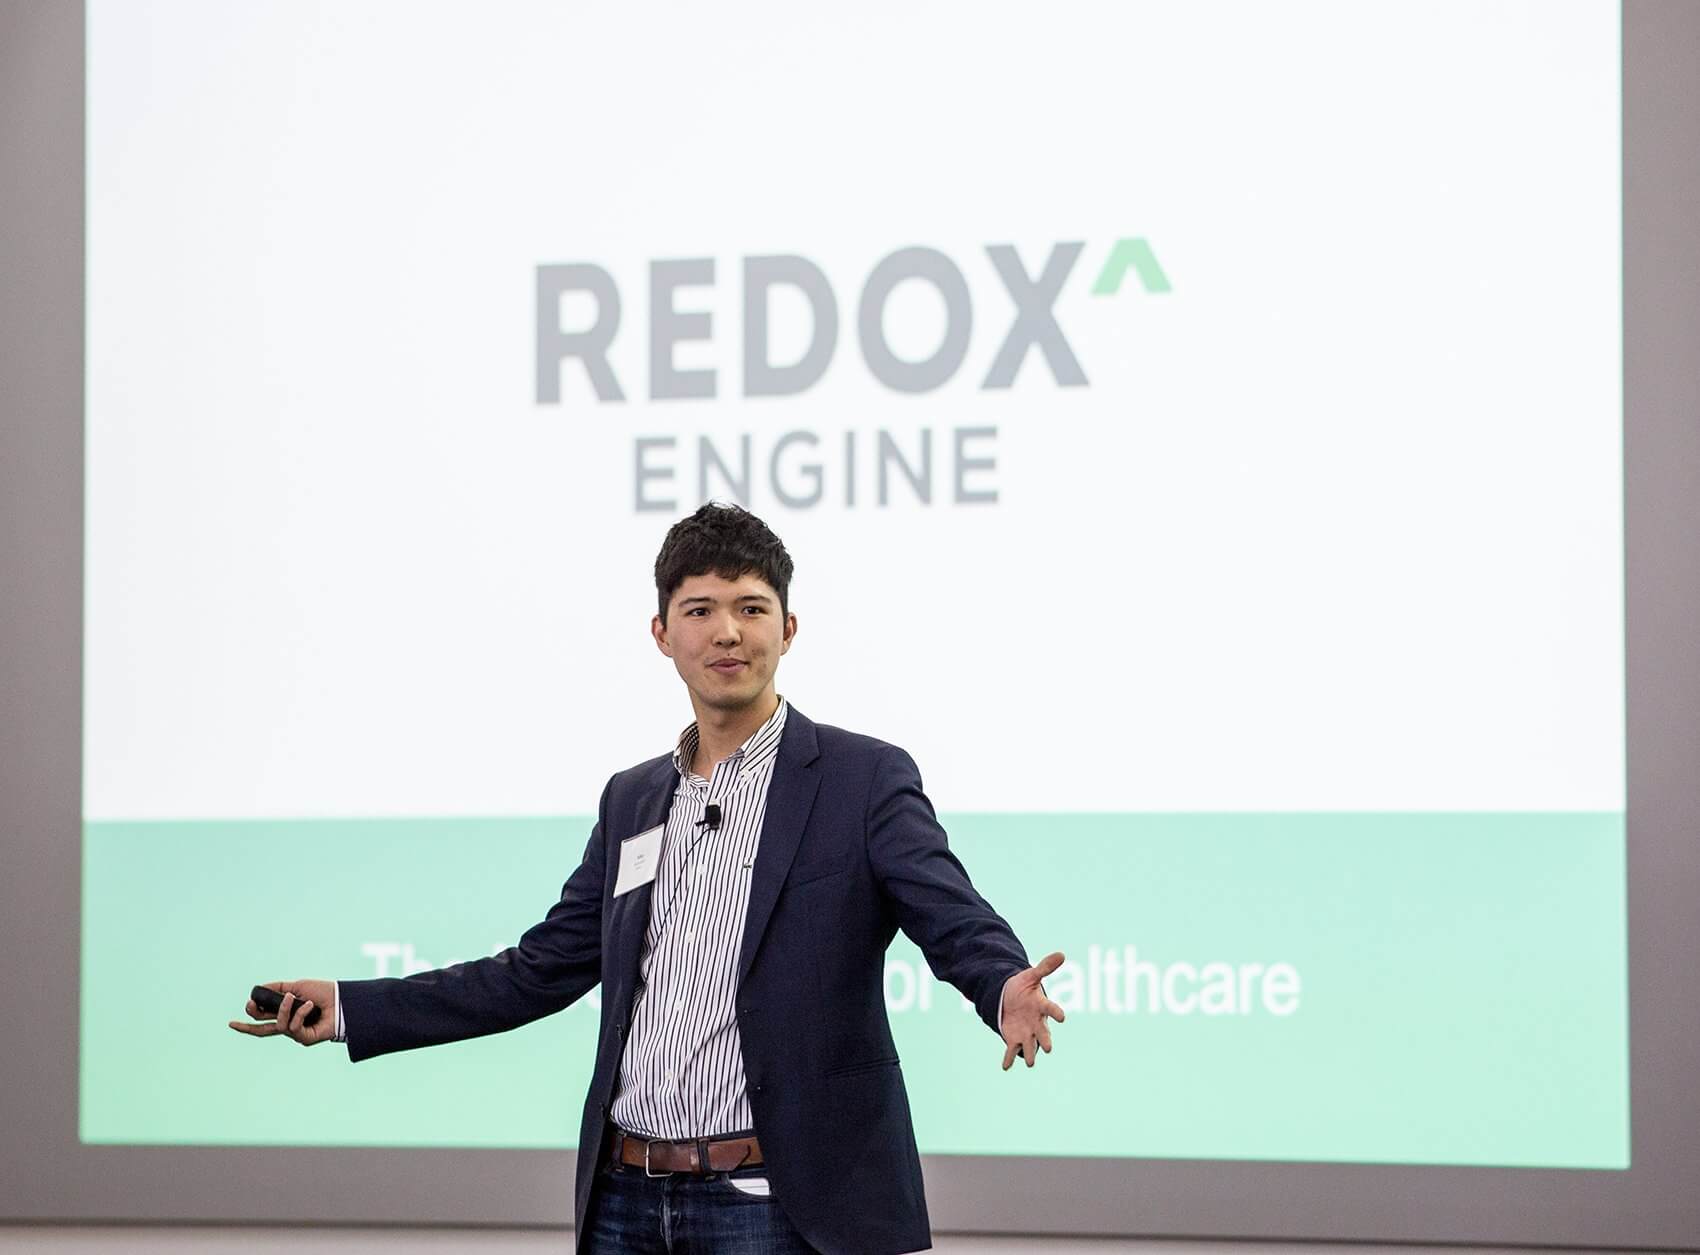 Niko Skievaski, co-founder of Redox, describes his solution for making it easier to integrate with electronic medical records.